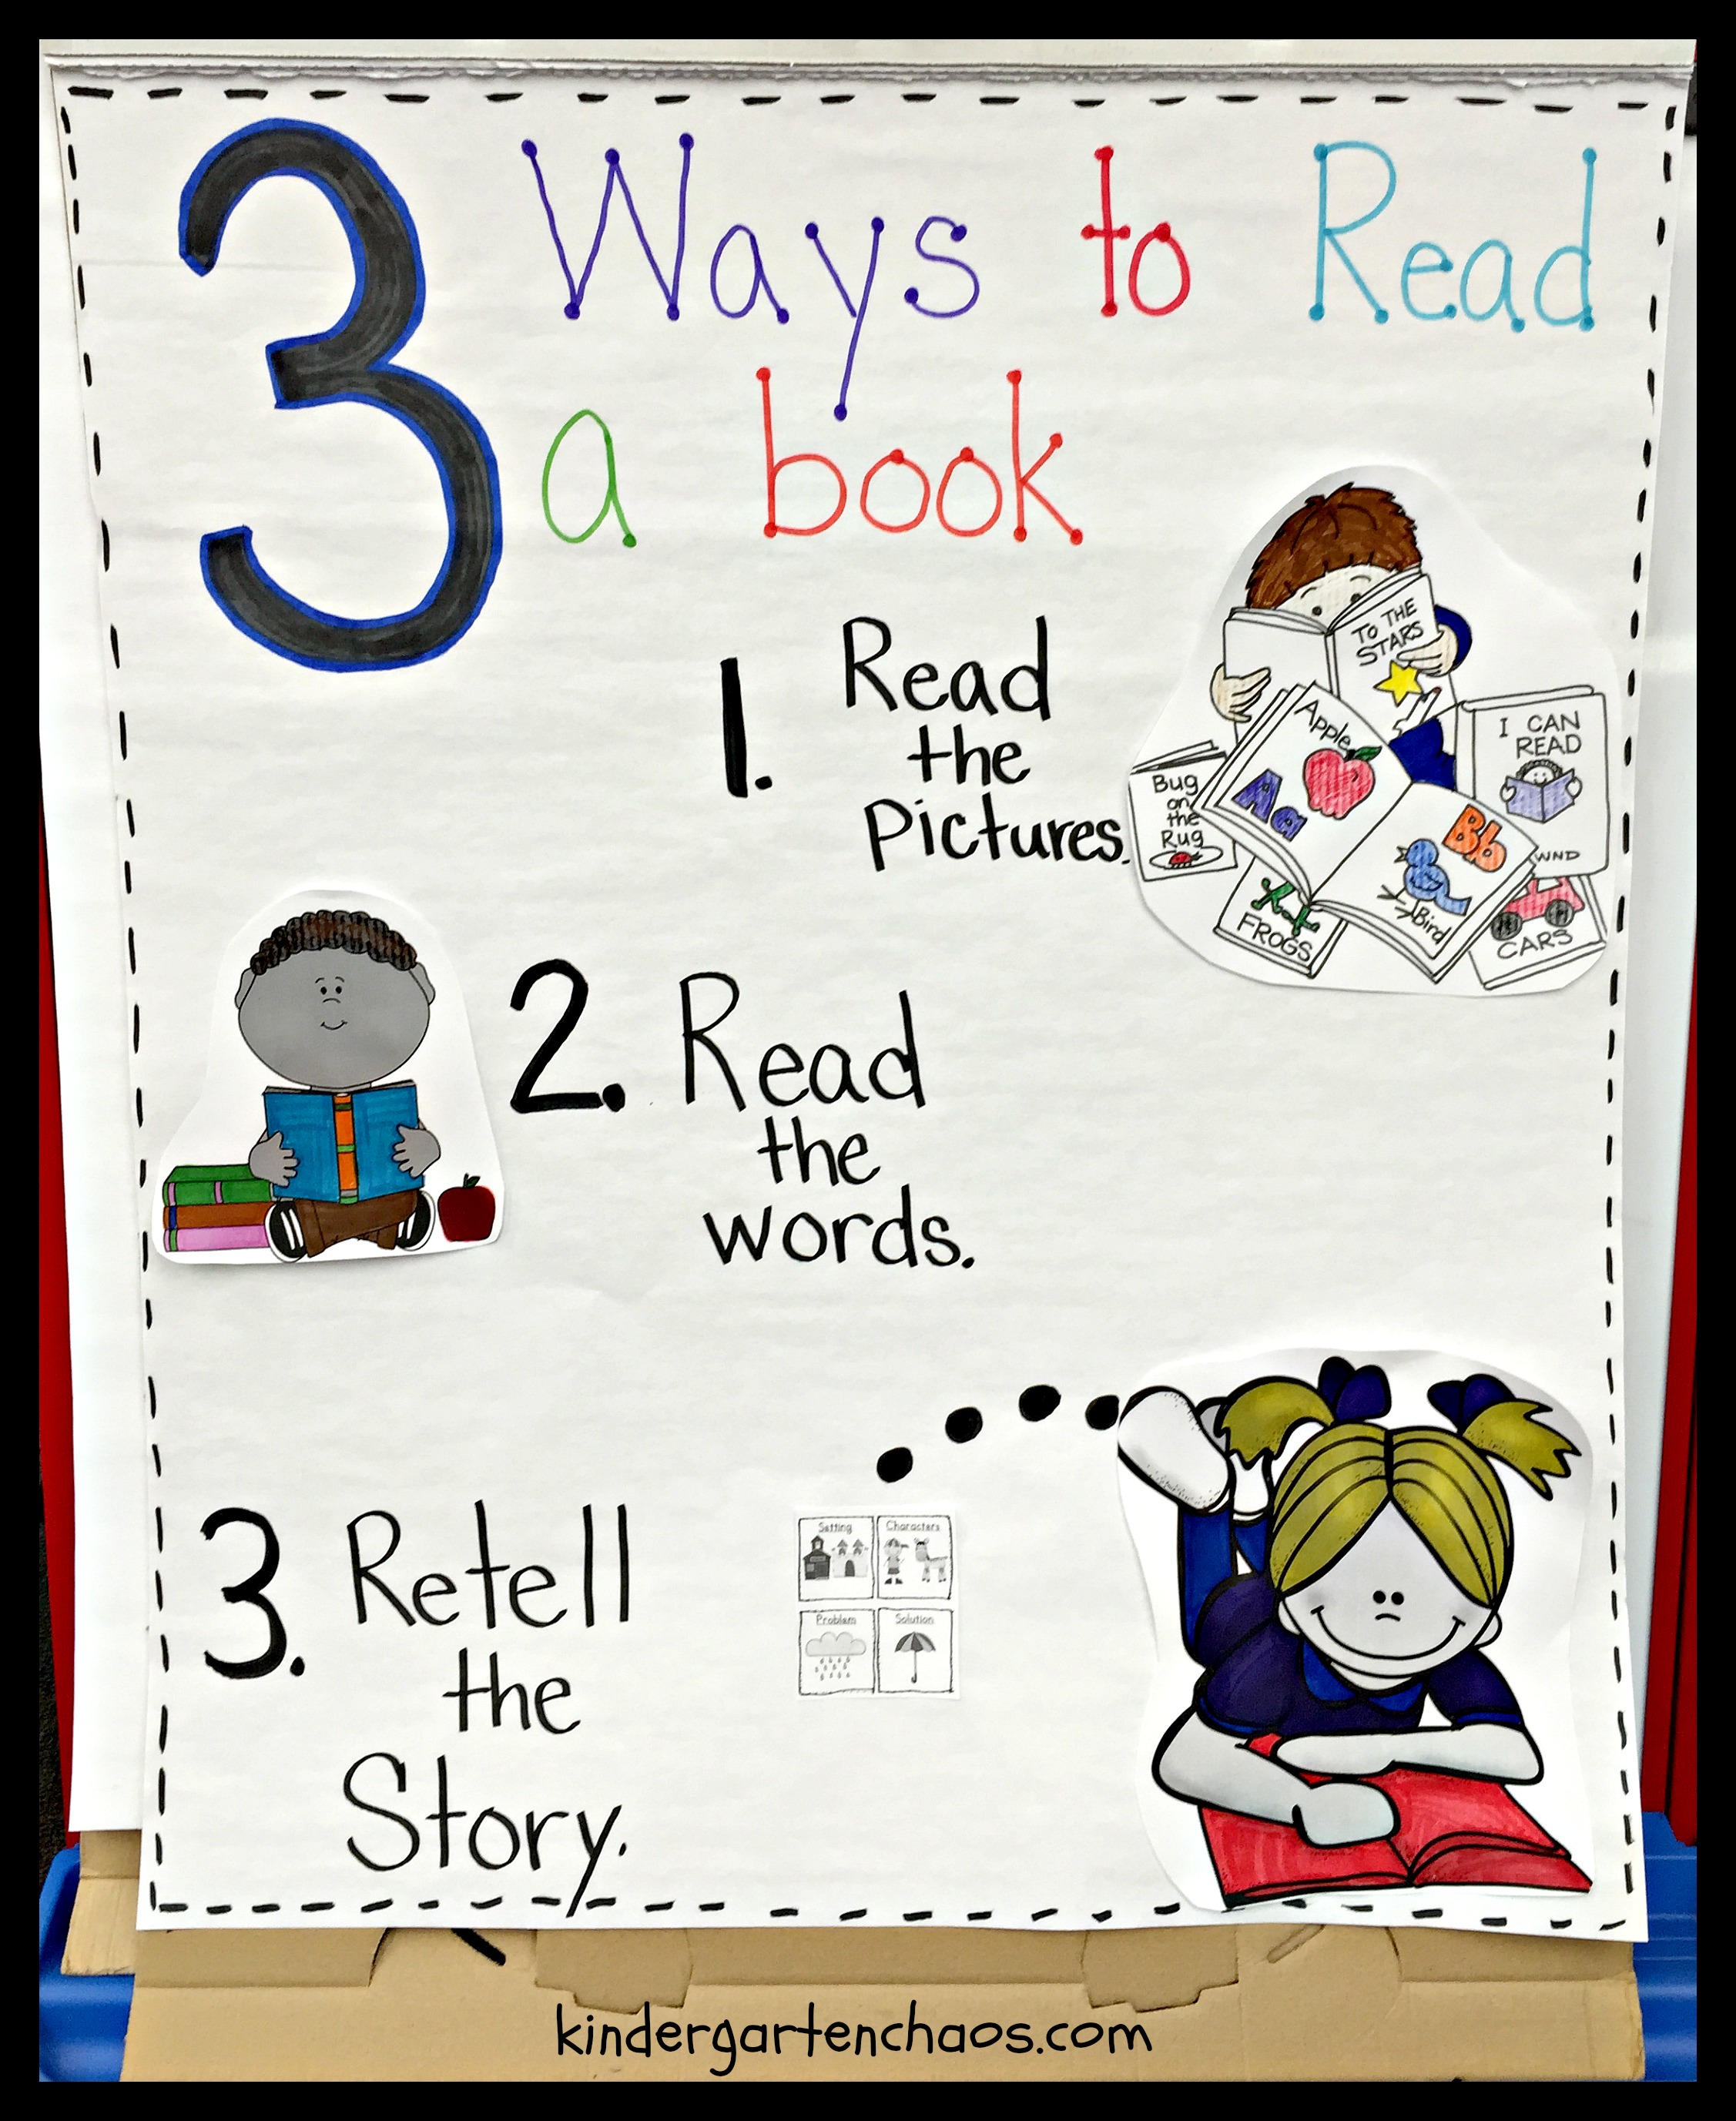 3-ways-to-read-a-book-daily-5-anchor-chart-kindergartenchaos